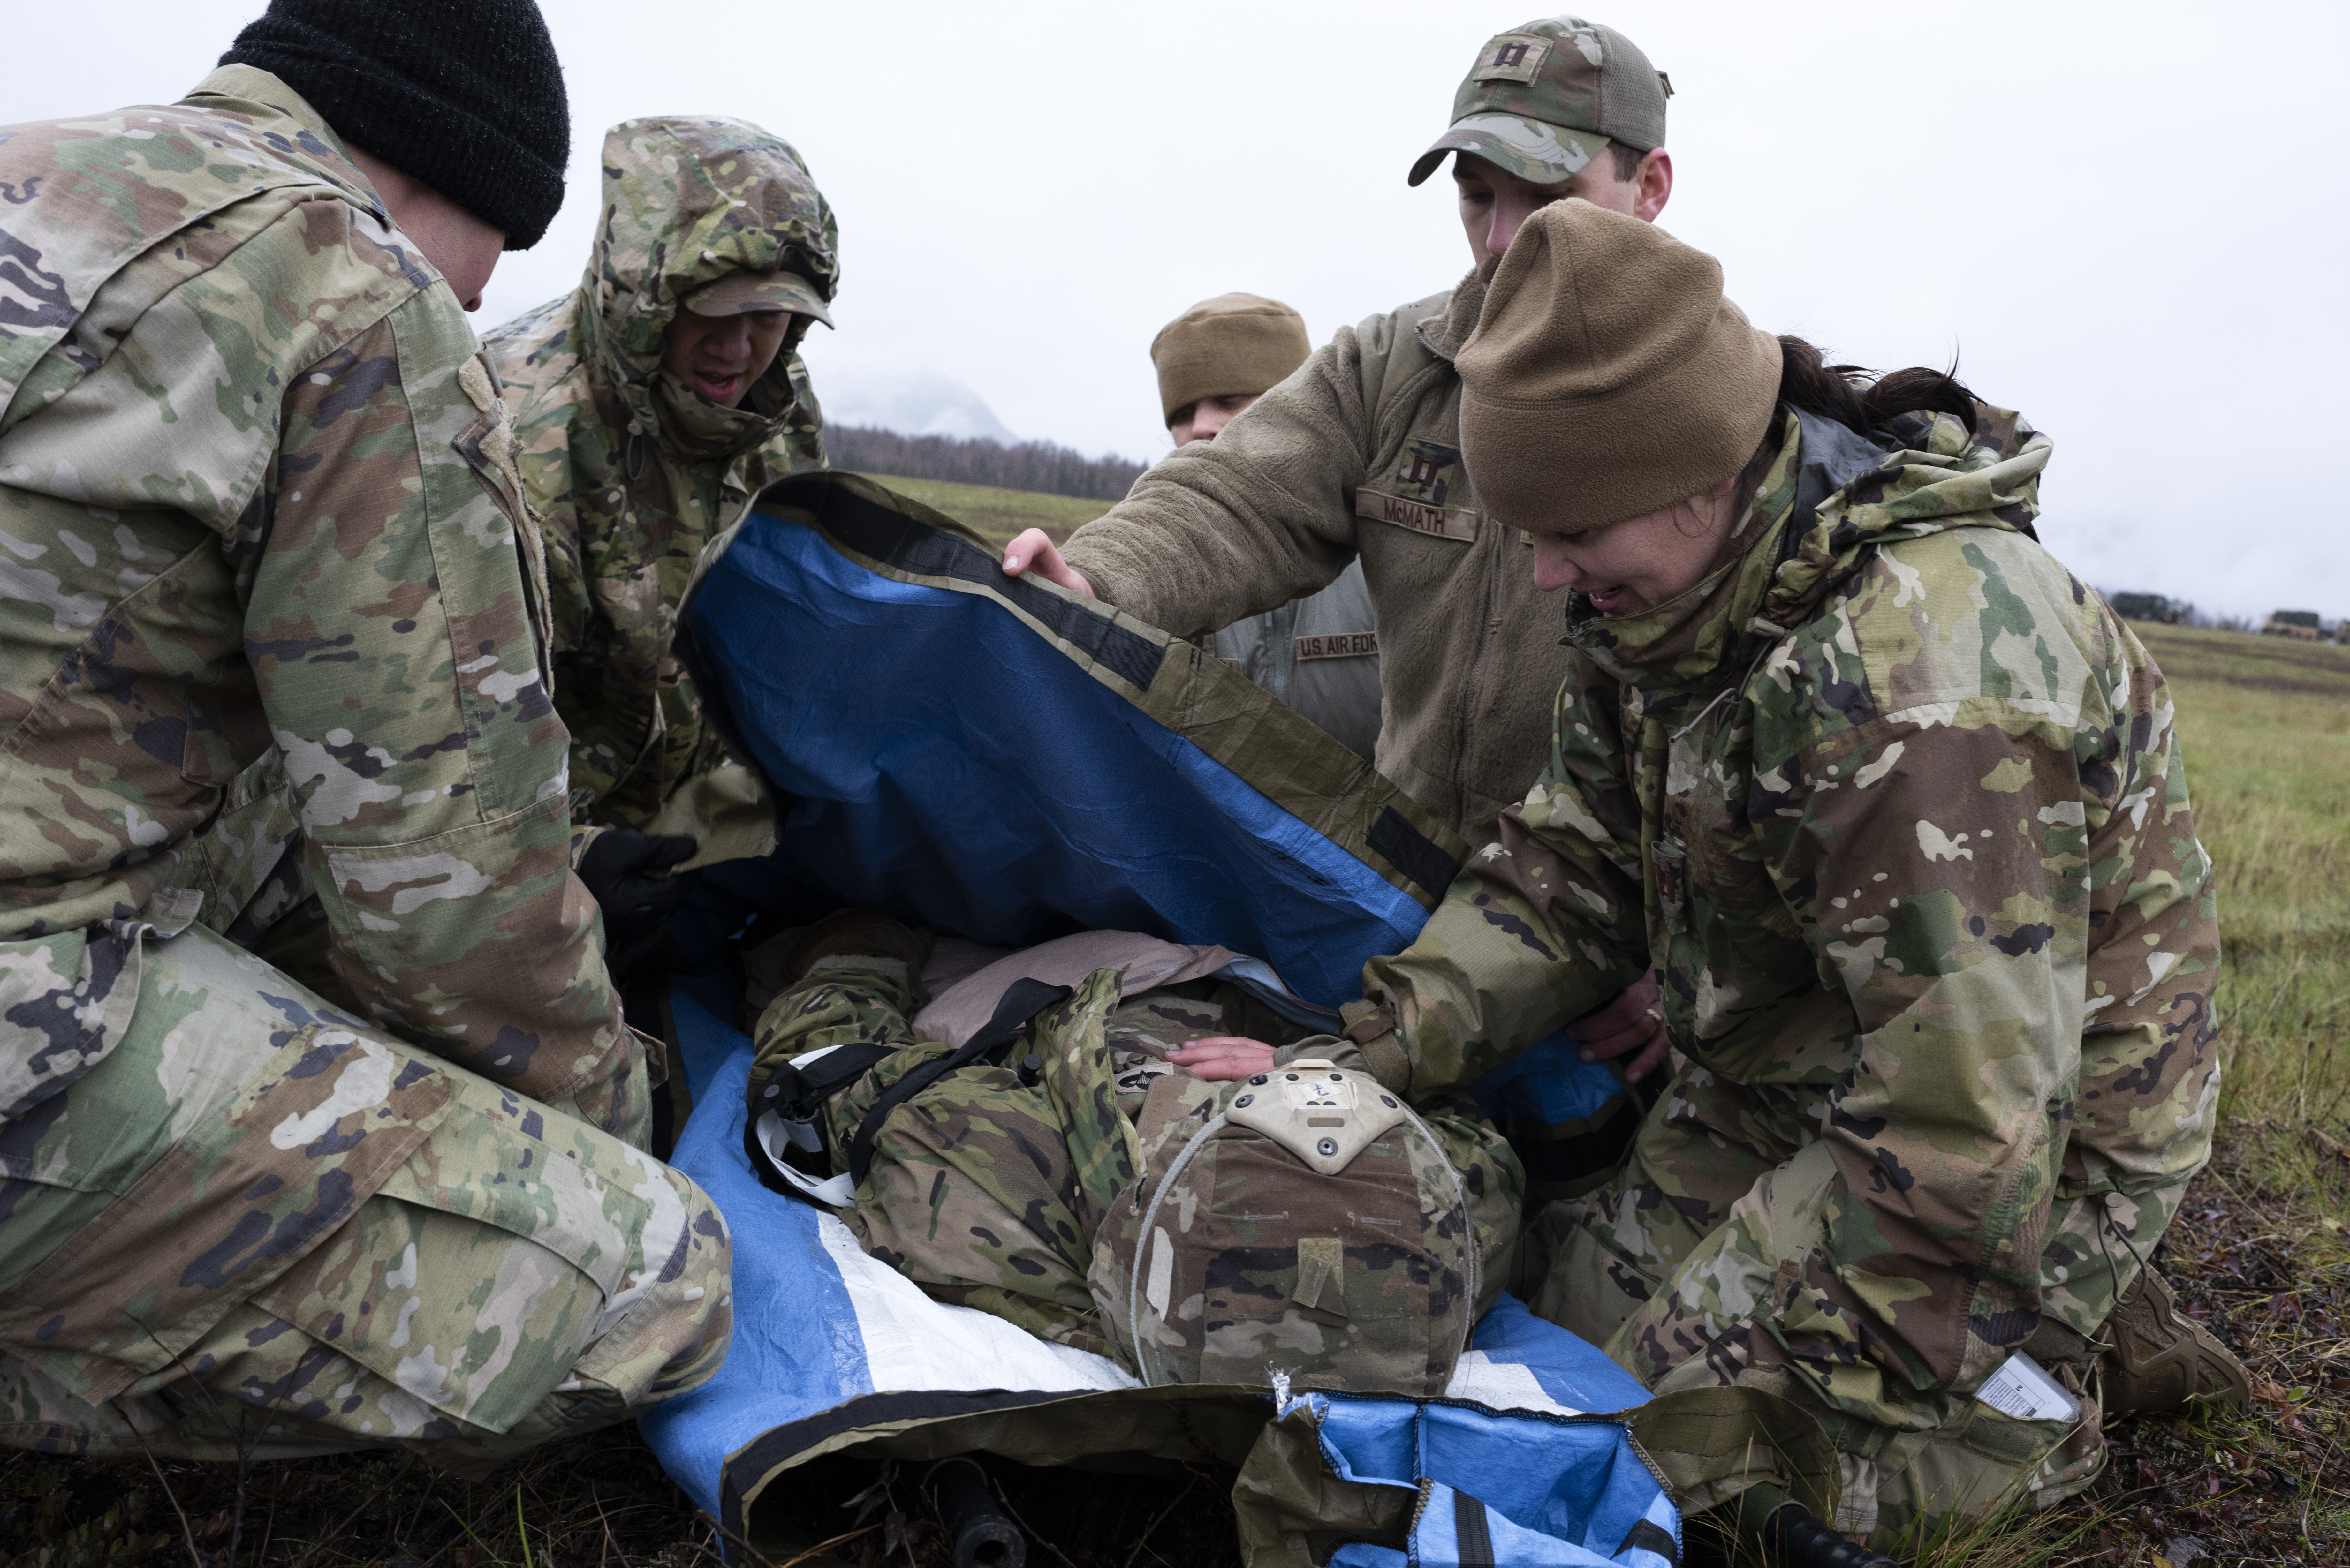 Enhancing Medical Support in Extreme Conditions: Below Zero